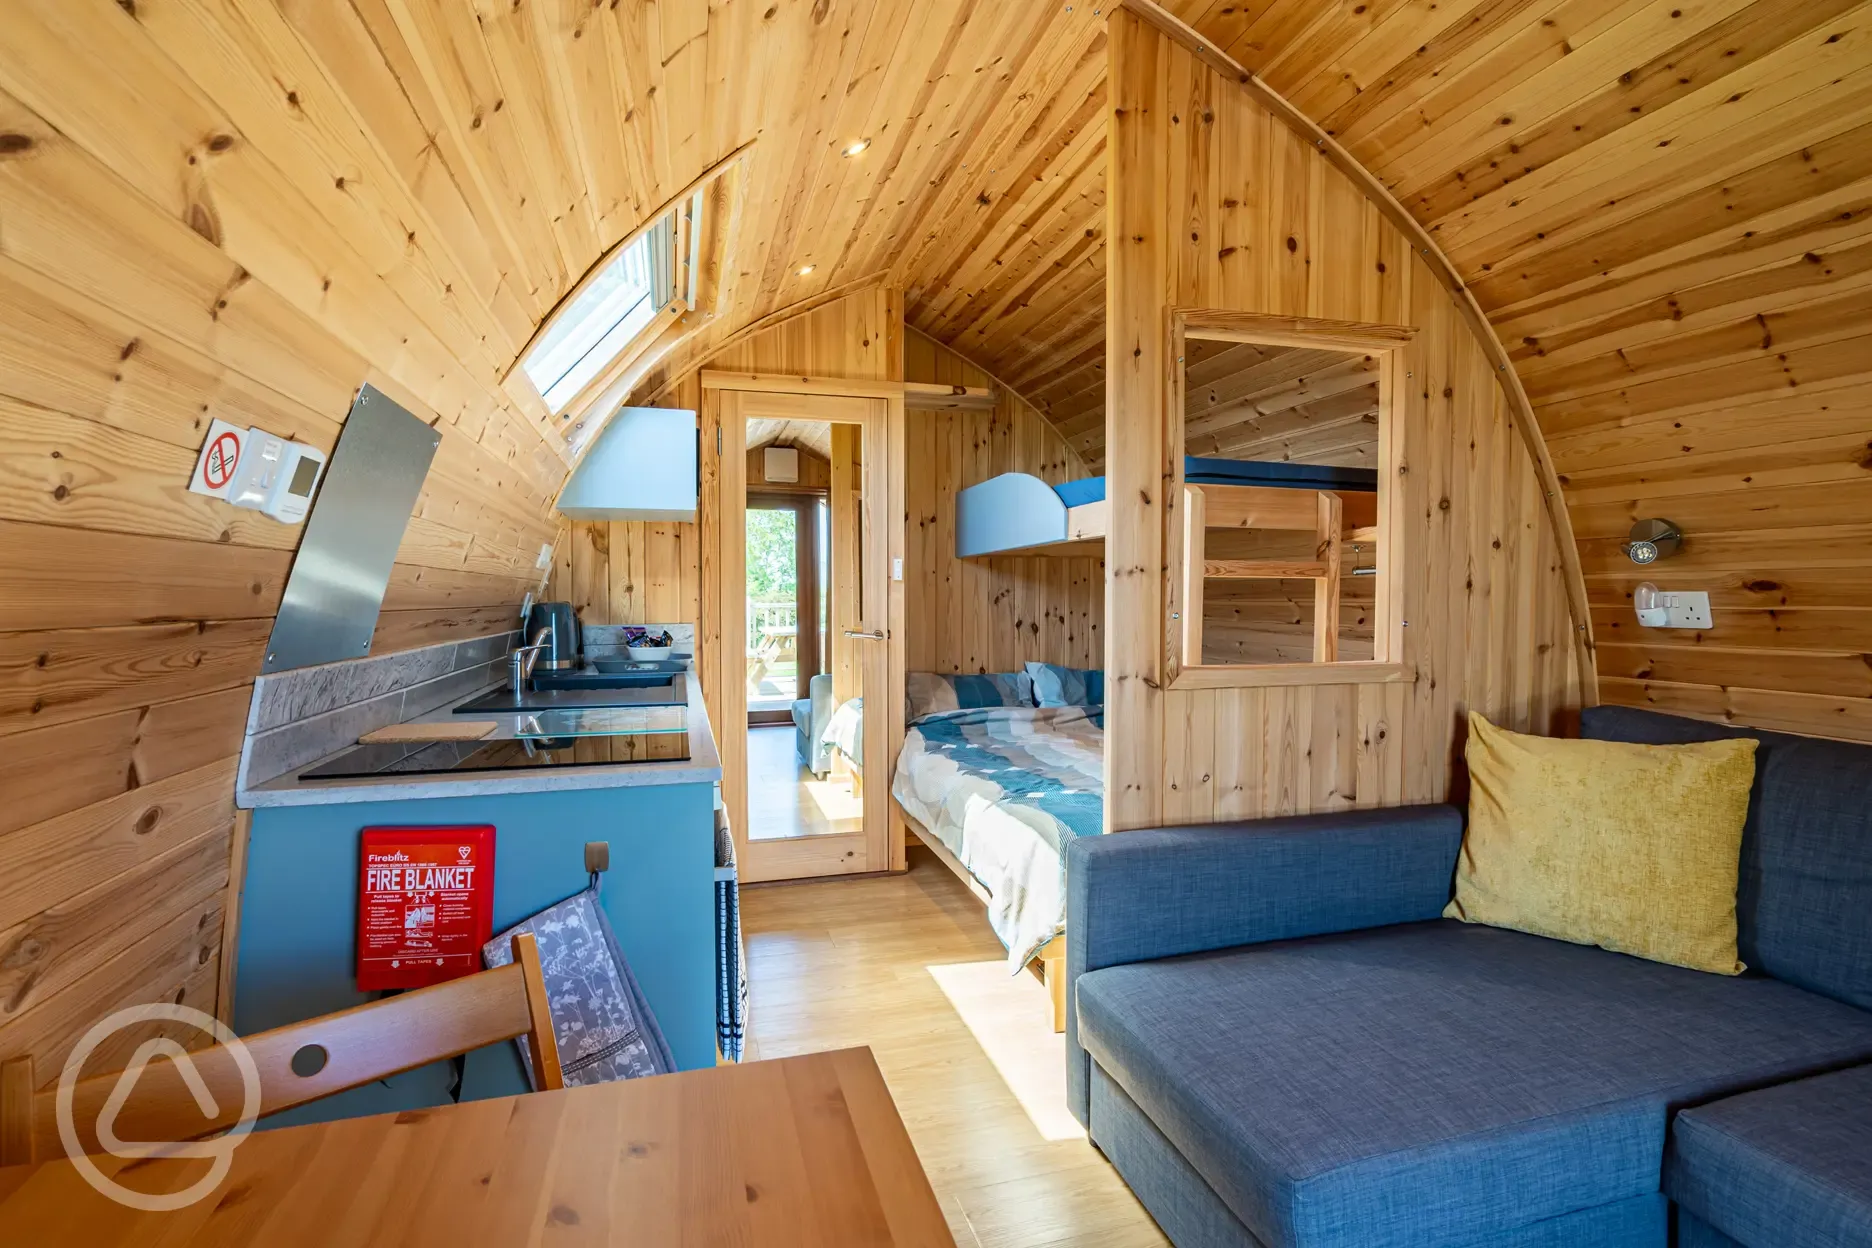 Camping pod with bunk beds interior